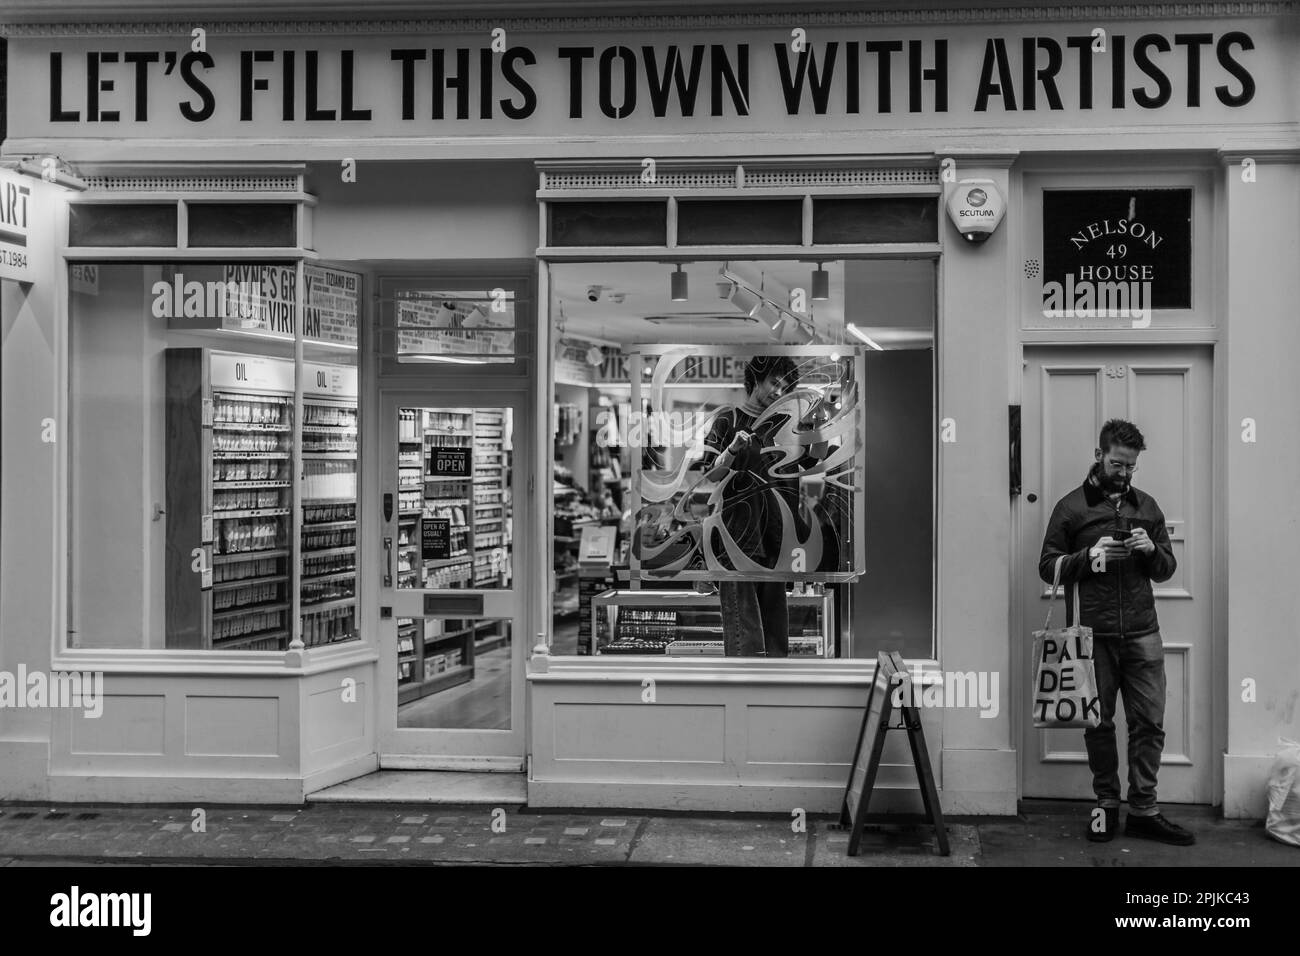 Let's Fill This Town With Artists store in London. Stock Photo